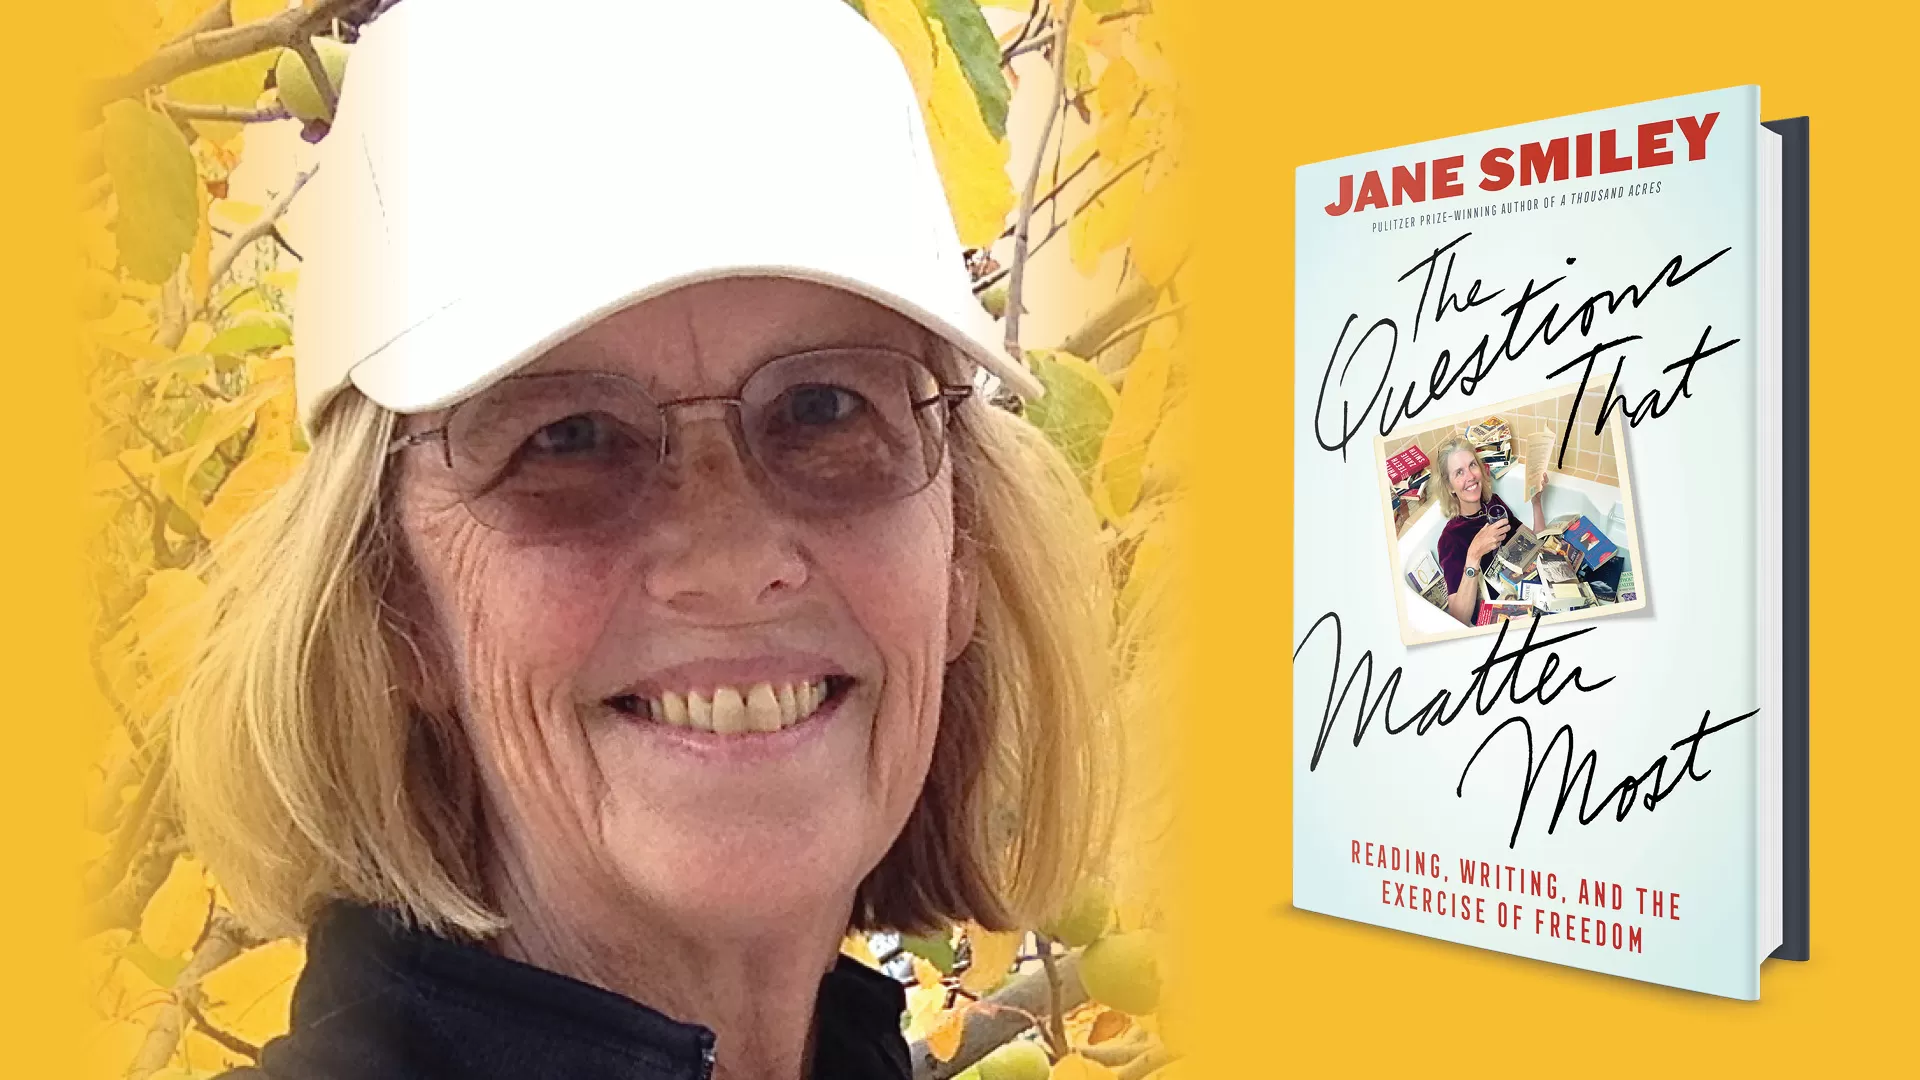 AN EVENING WITH AUTHOR JANE SMILEY